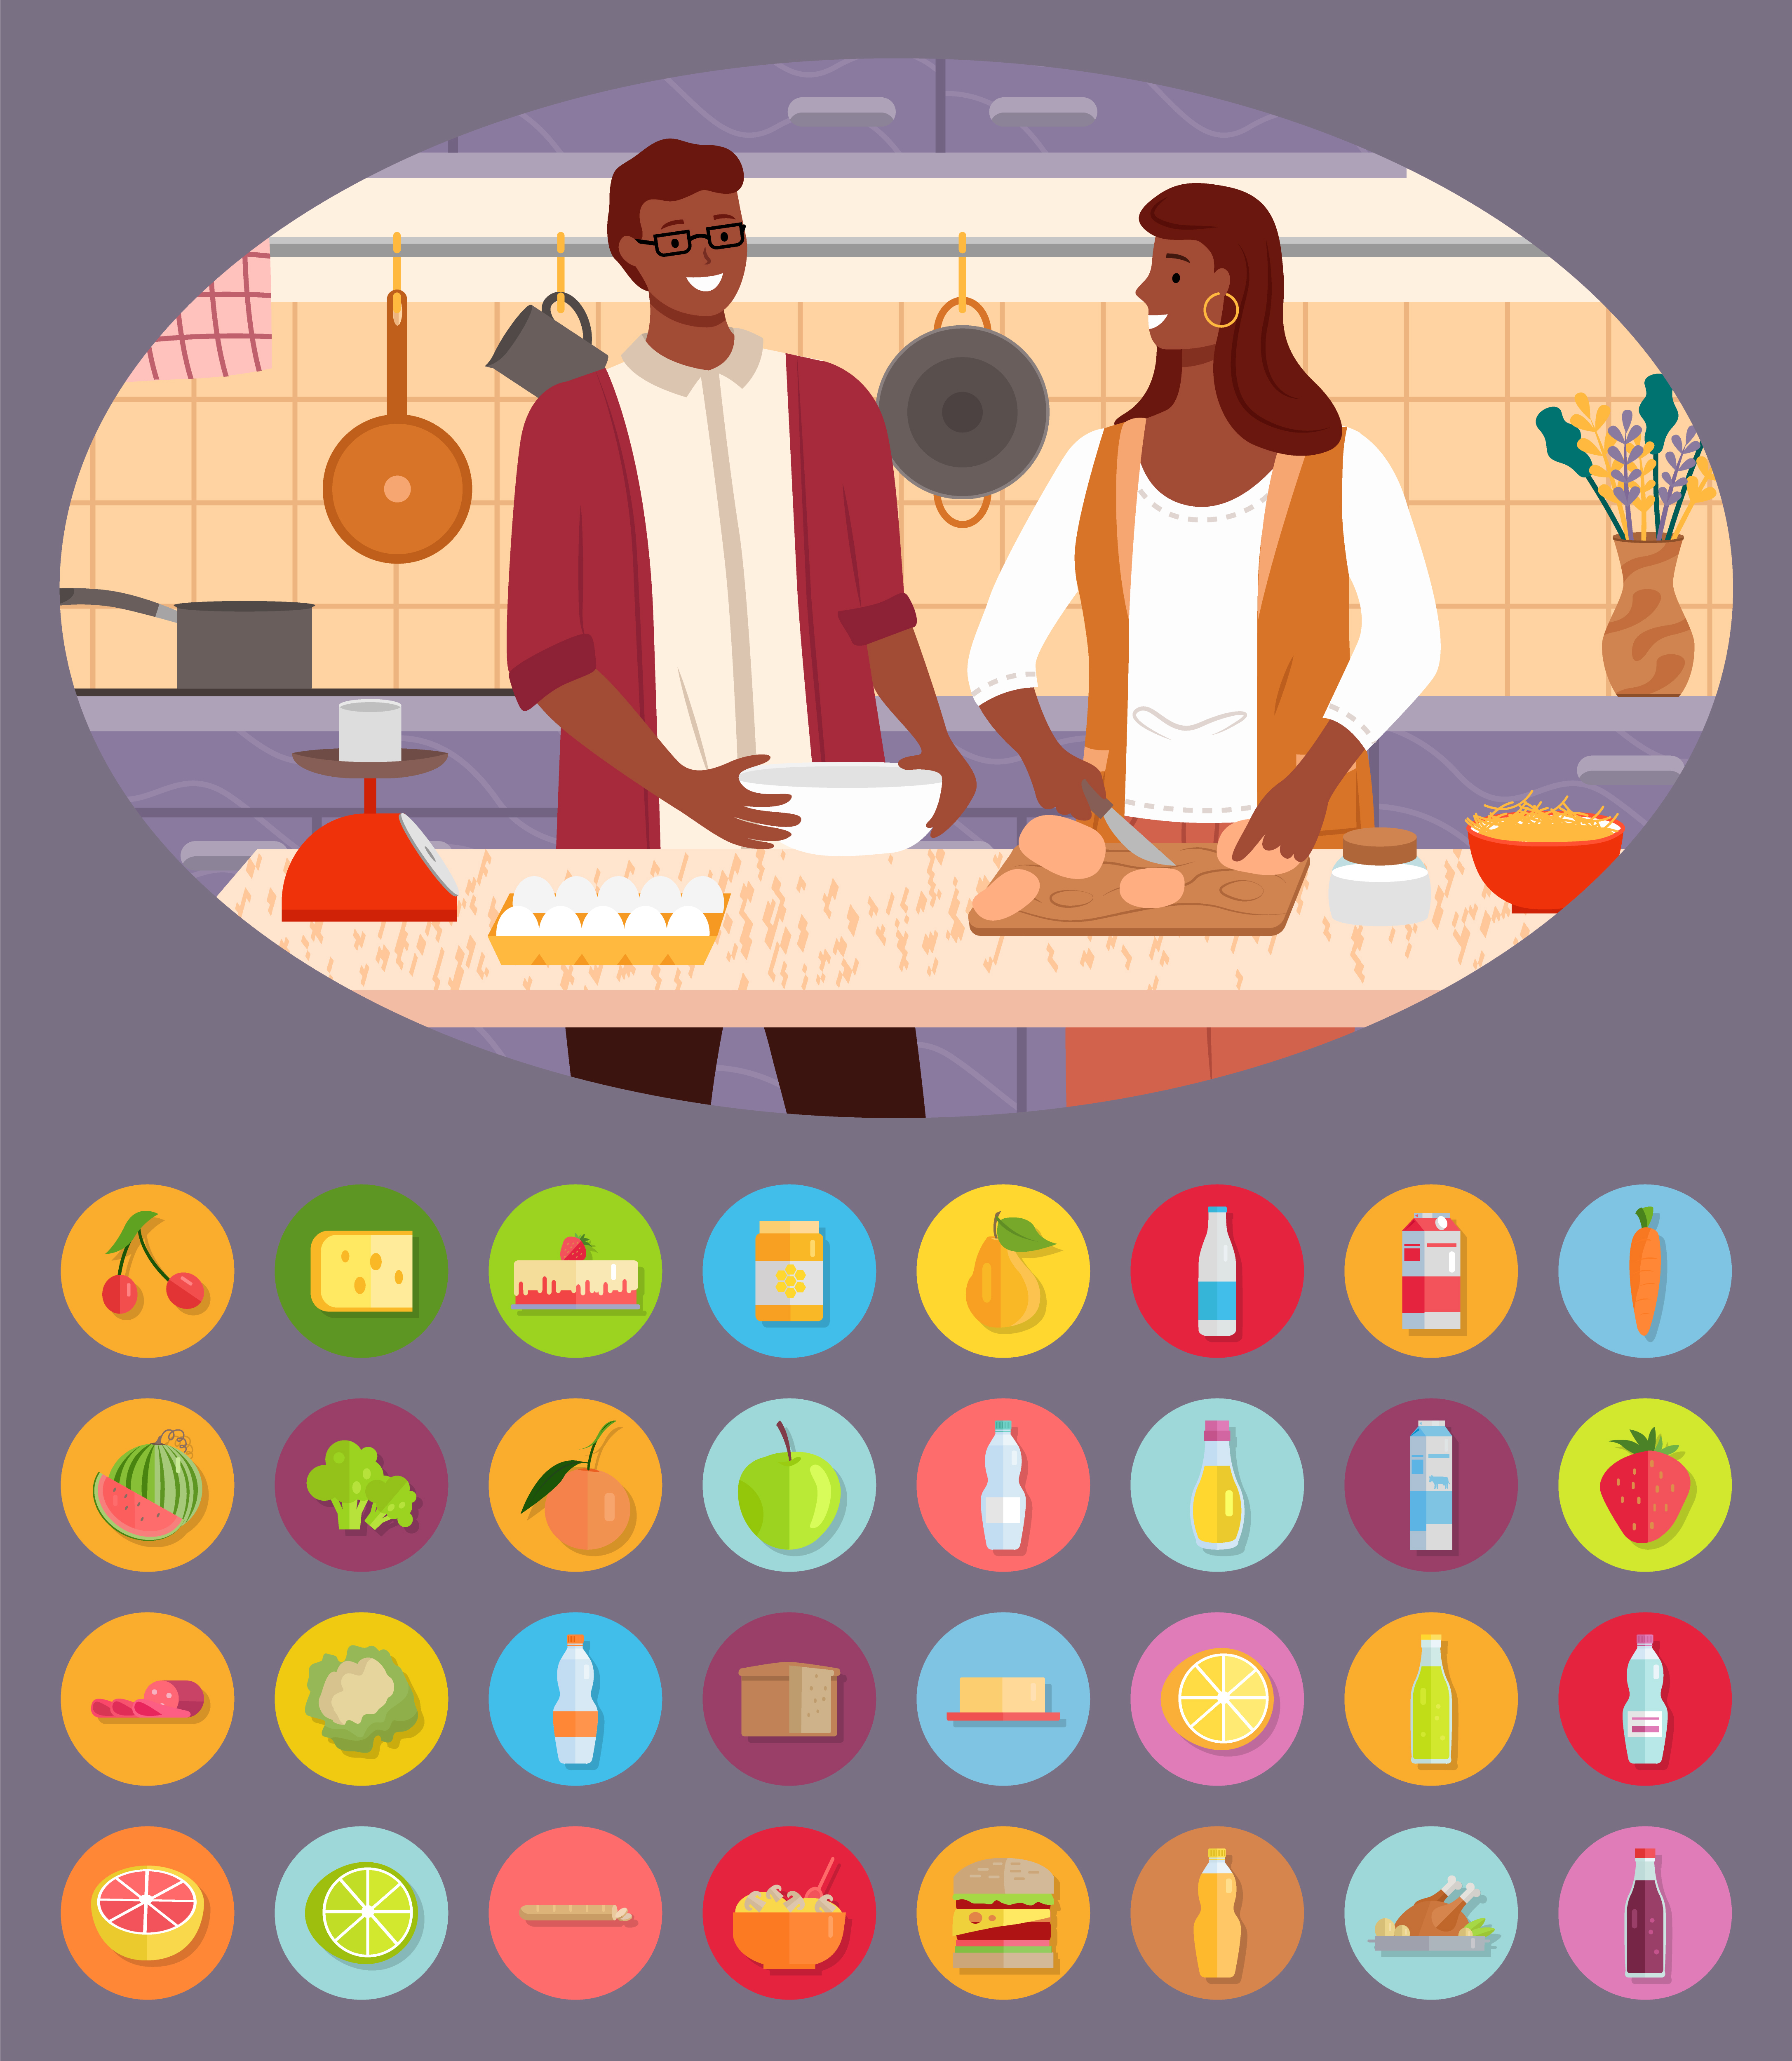 Man and woman stand together by table in kitchen. Kitchenware like weighing scale and products on desk. Icons of ingredients for meal, vegetables and fruits, liquids and food. Vector illustration. Man and Woman Cooking Together, Icons of Products